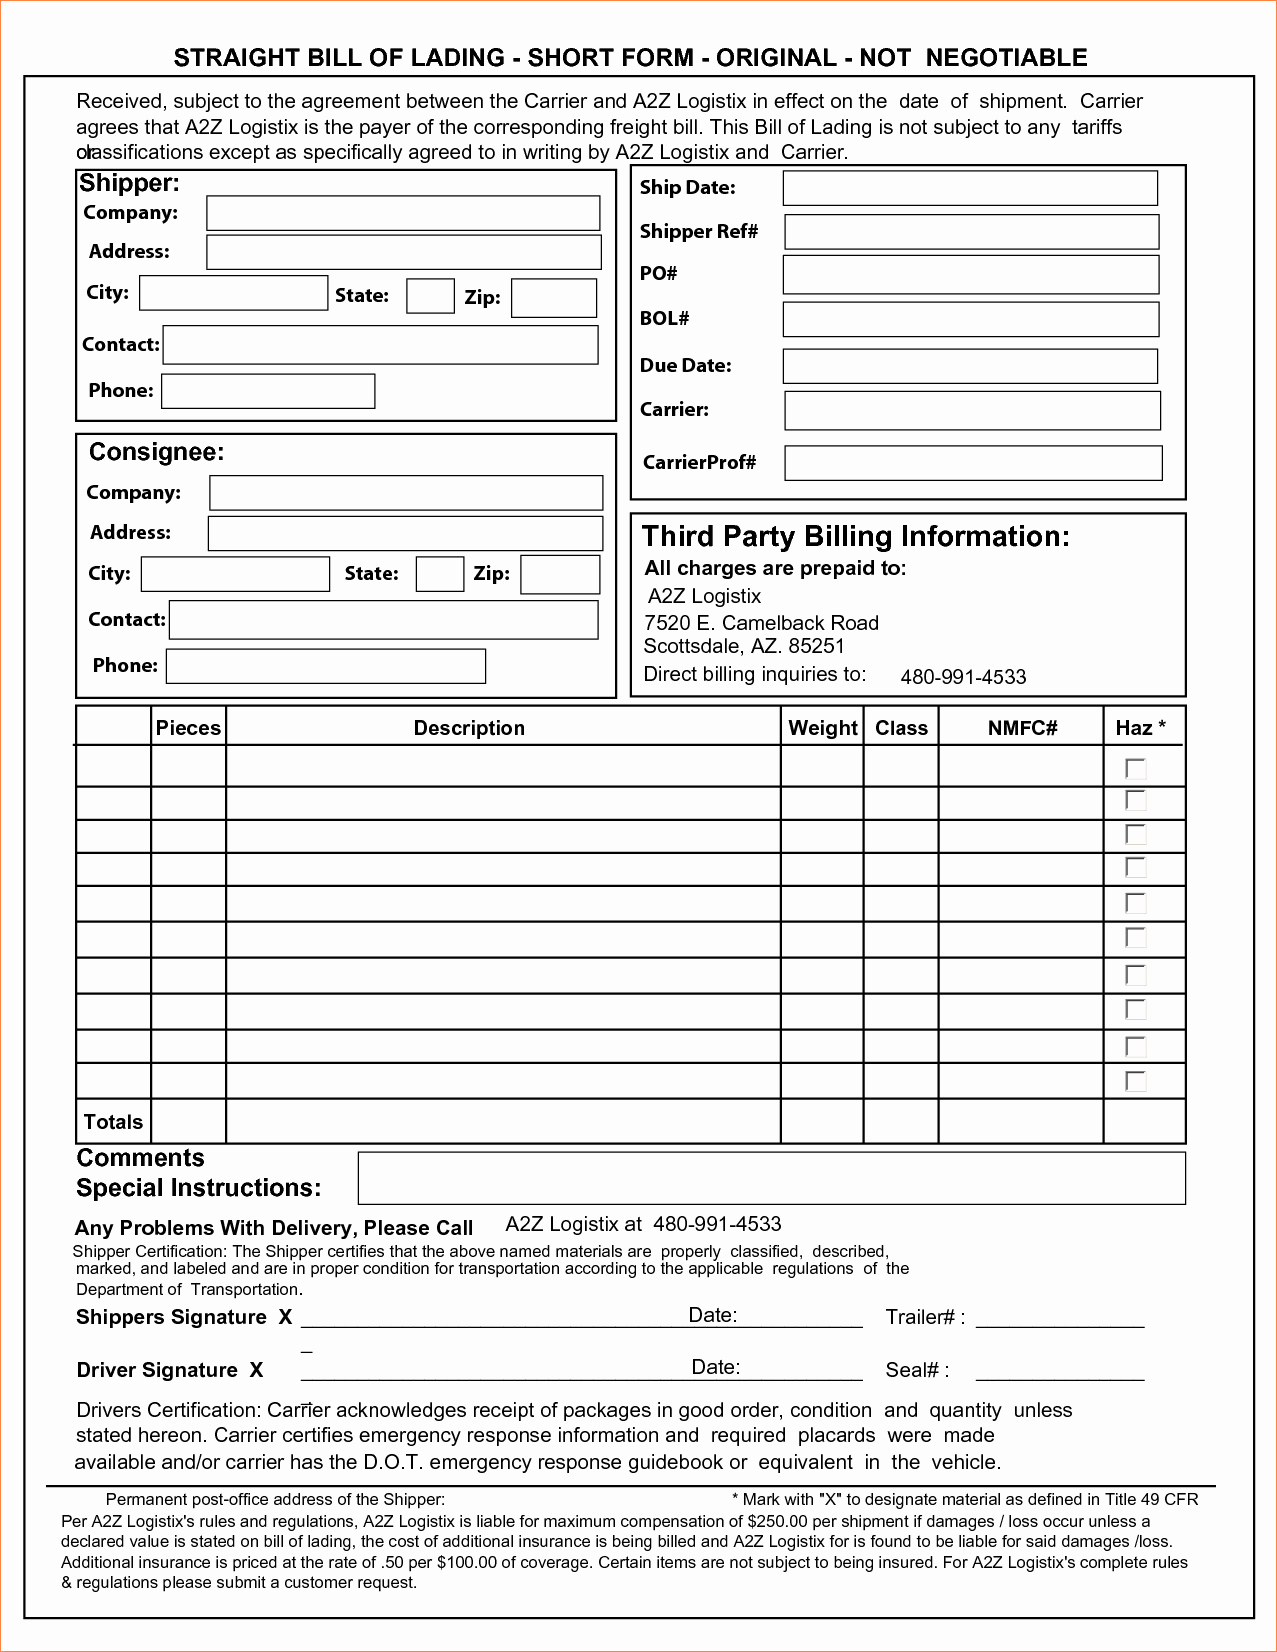 3 Bill Of Lading formsreport Template Document